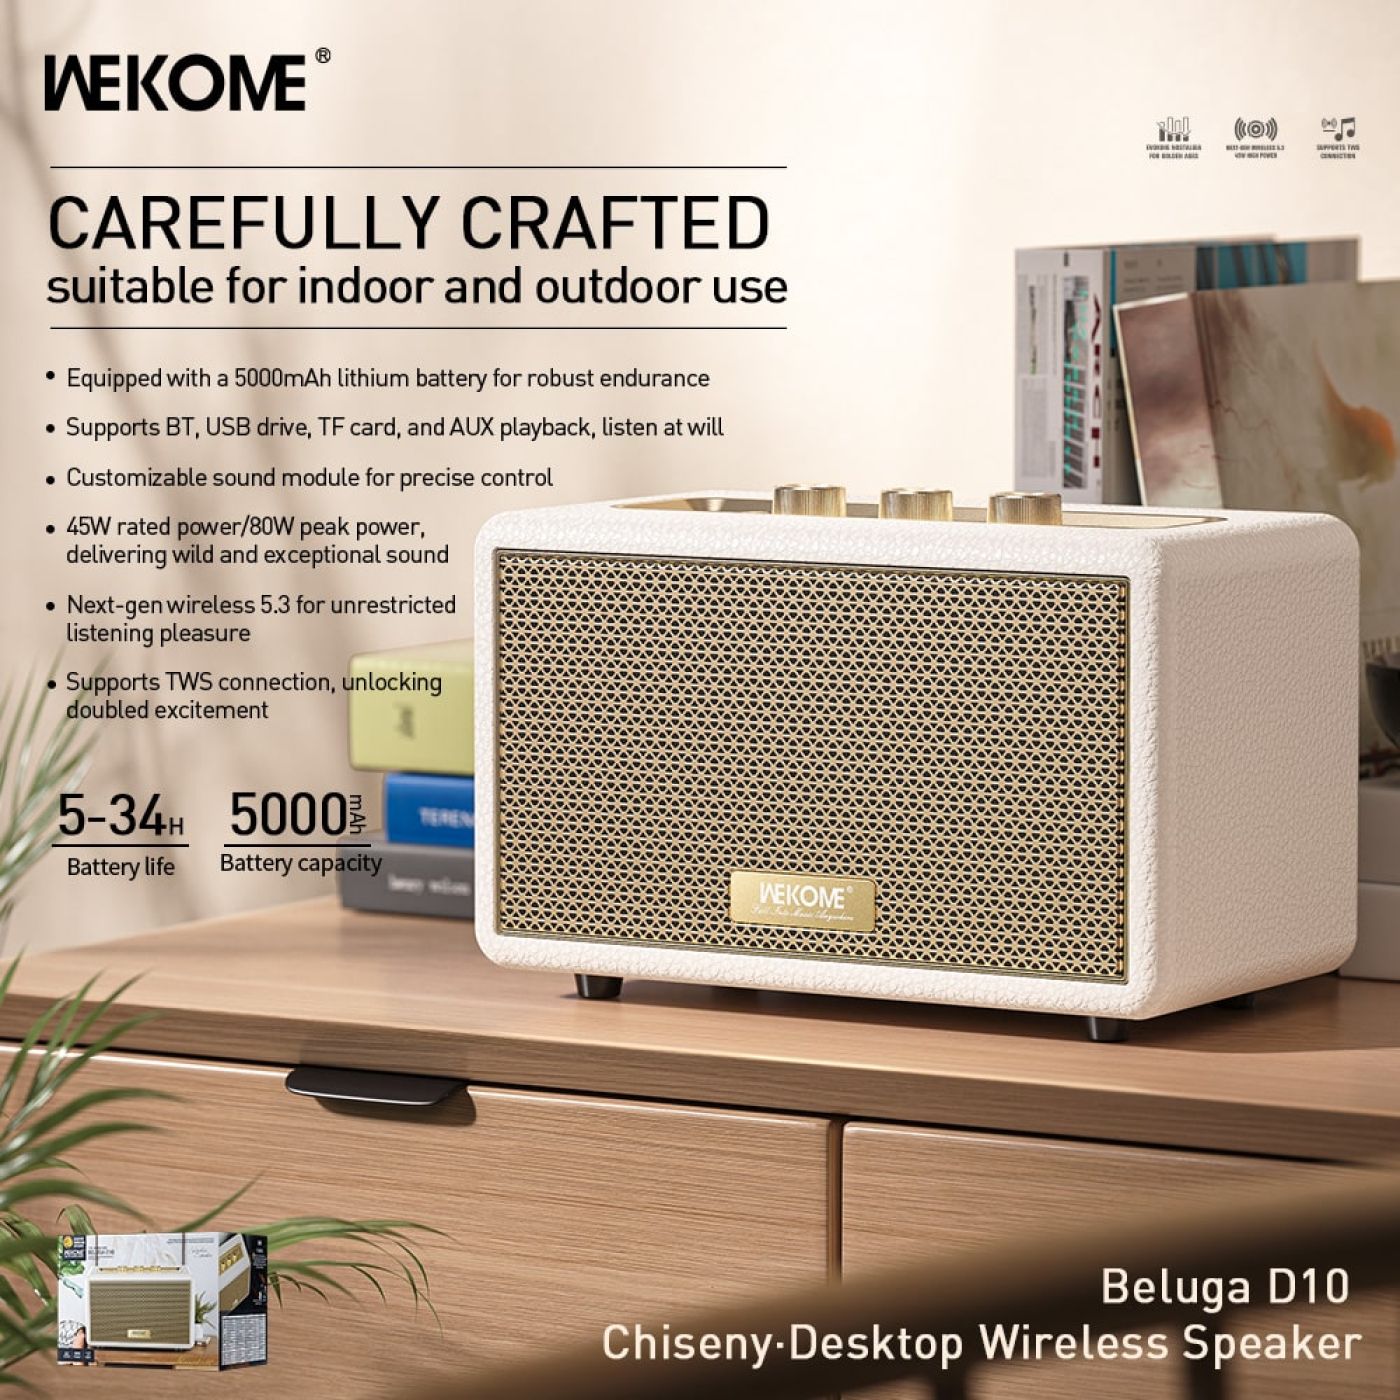 Loa Bluetooth WEKOME Carefully Crafted suitable for indoor and outdoor use Beluga D10 Wireless Speak